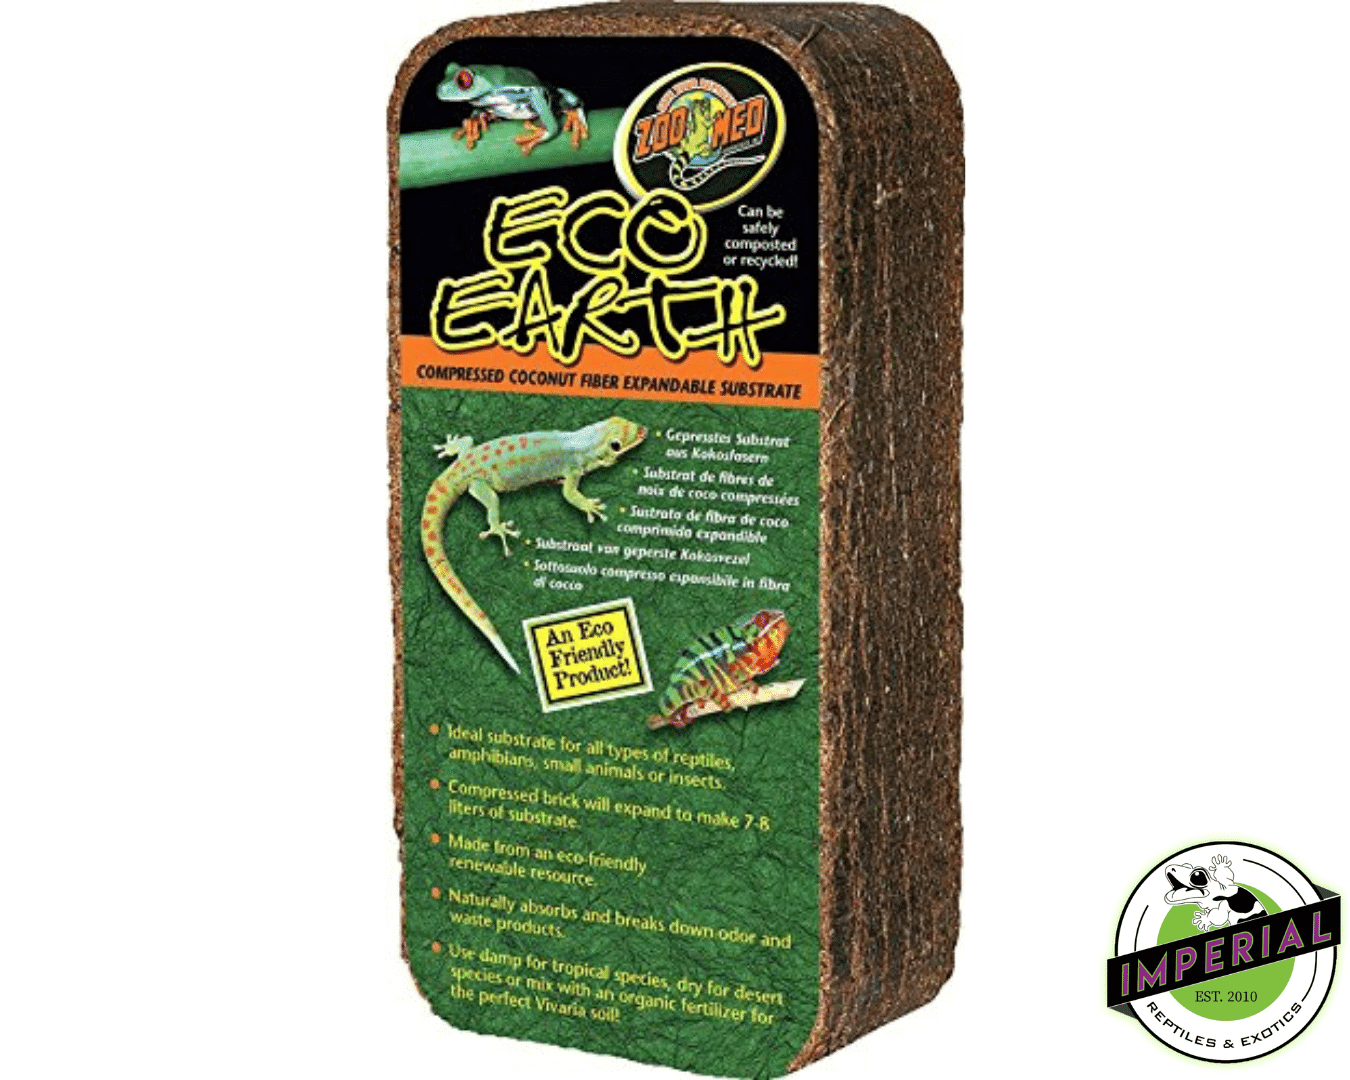 eco earth reptile substrate for sale online. buy cheap reptile bedding near me